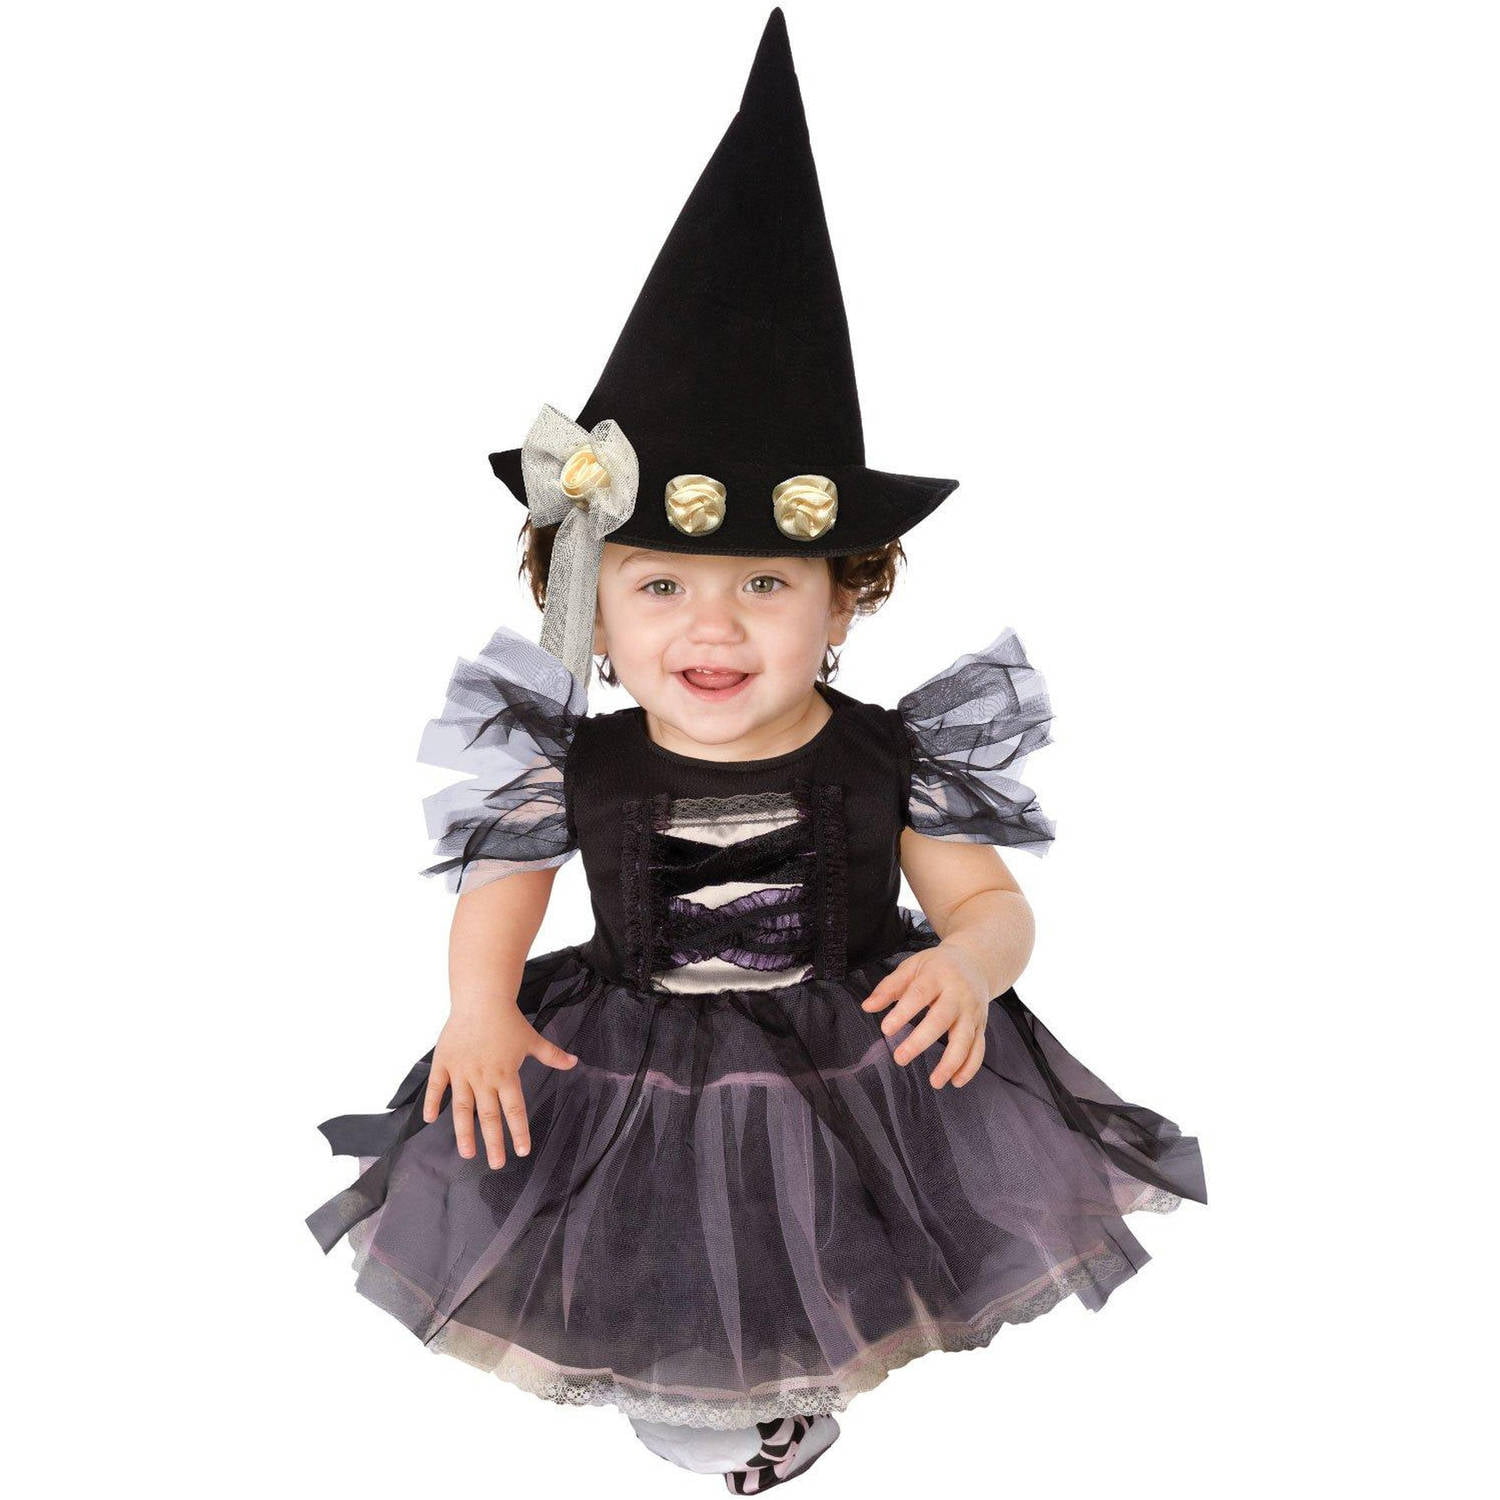 Lace Witch Toddler Halloween Costume, 12-18 Months - Walmart.com